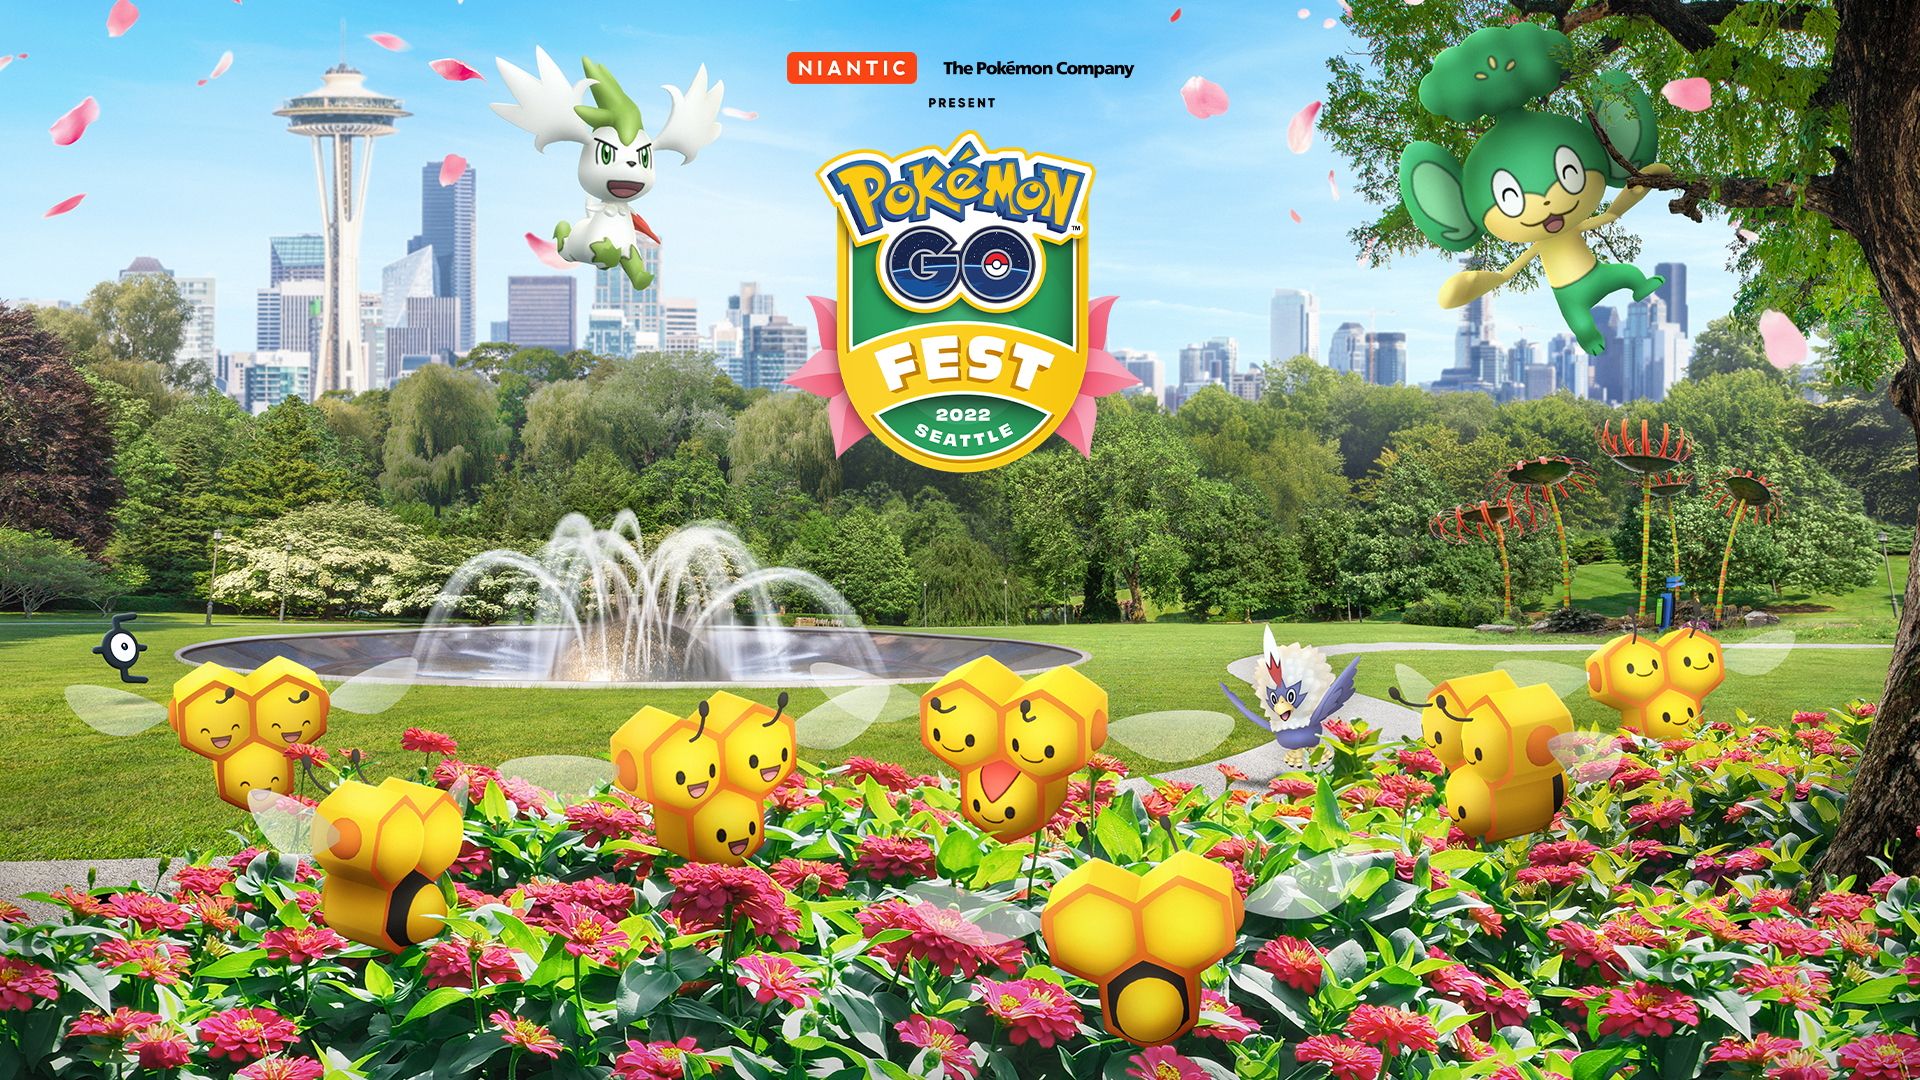 Pokemon Go Fest Seattle Image with several event Pokemon in a park with flowers and a fountain